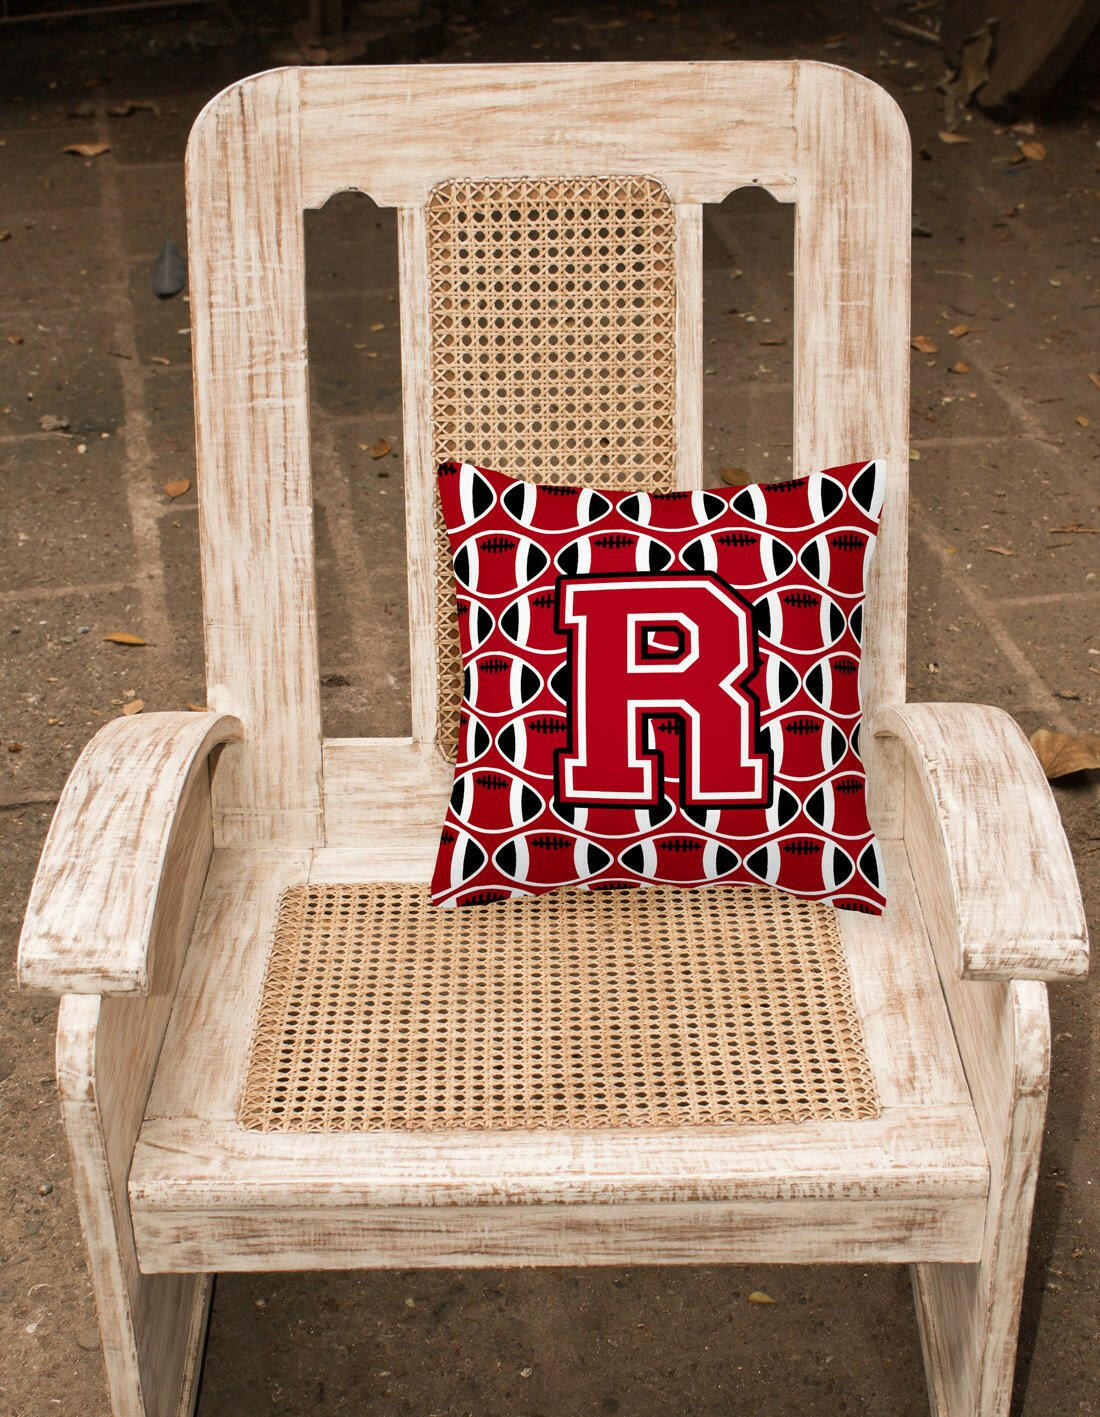 Letter R Football Red, Black and White Fabric Decorative Pillow CJ1073-RPW1414 by Caroline's Treasures